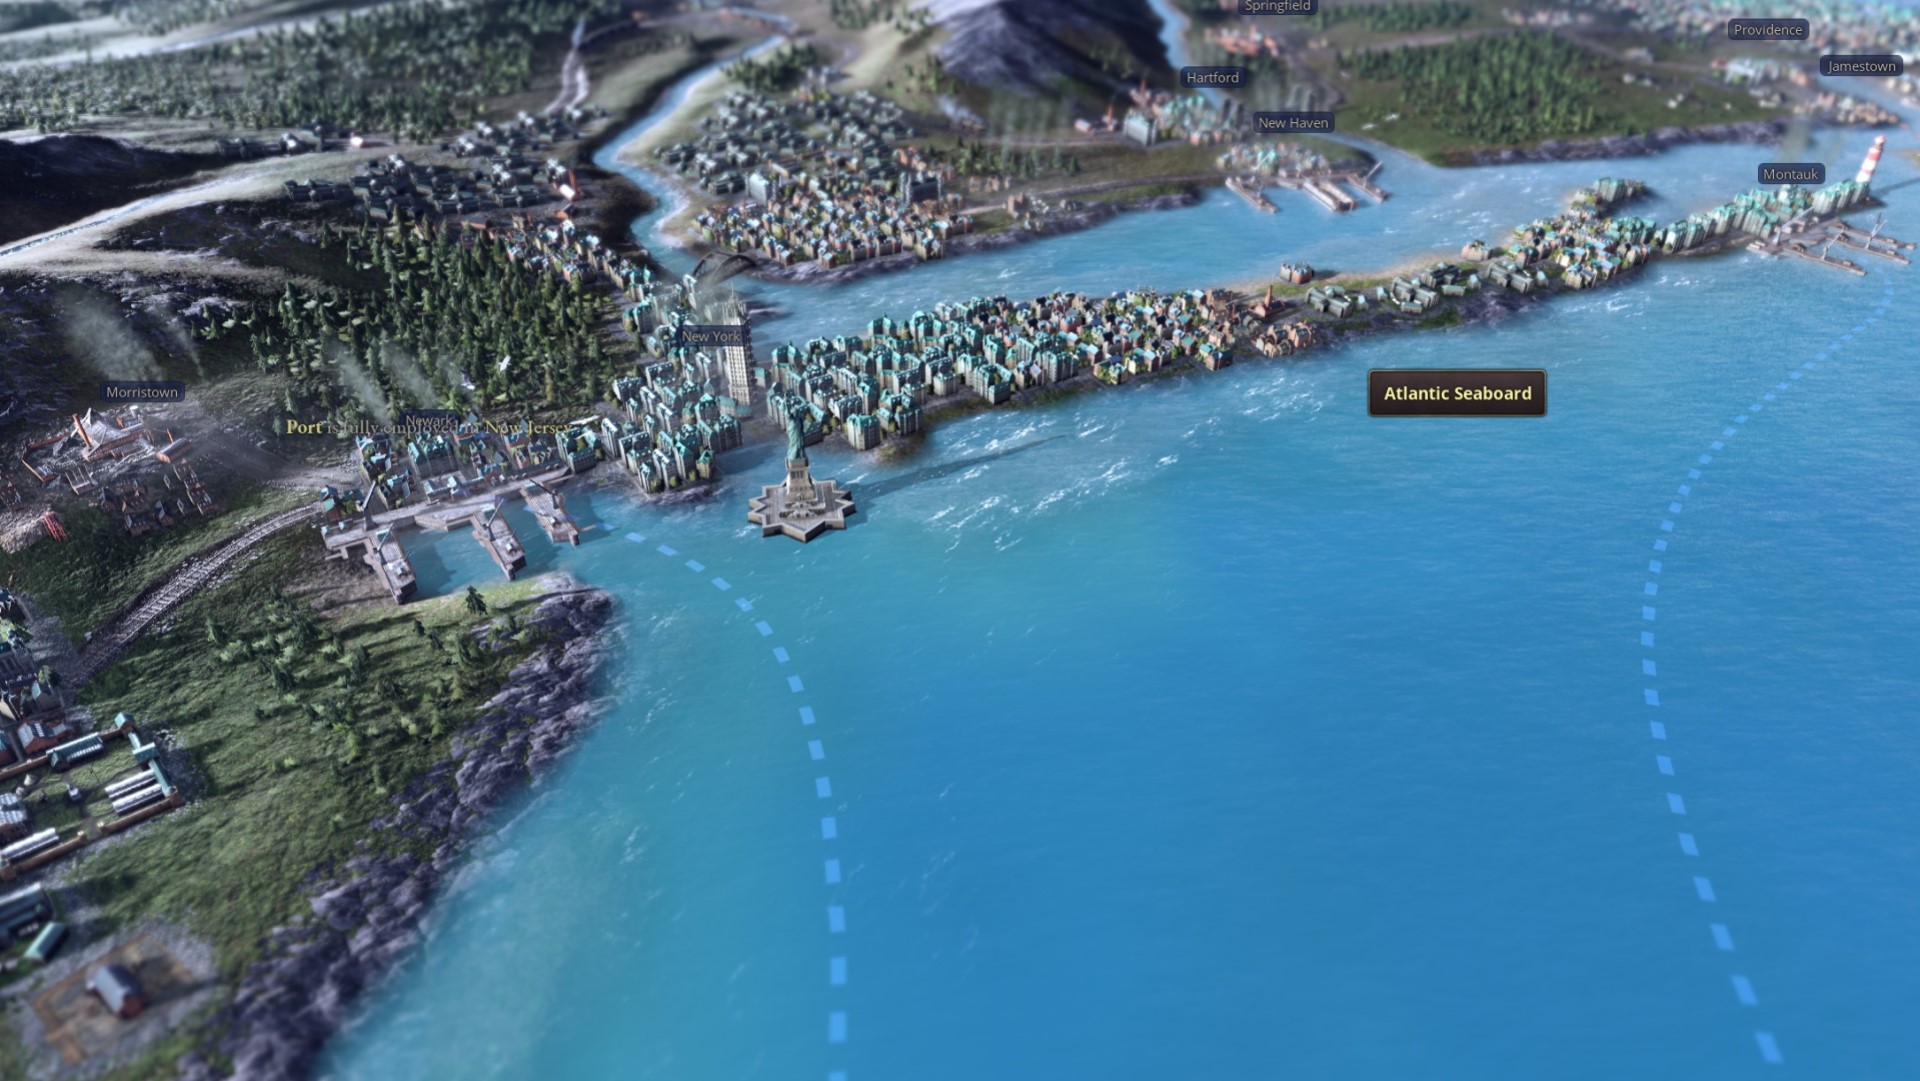 Victoria 3 review: New York City and Long Island are densely packed with buildings in this close-up view in Victoria 3